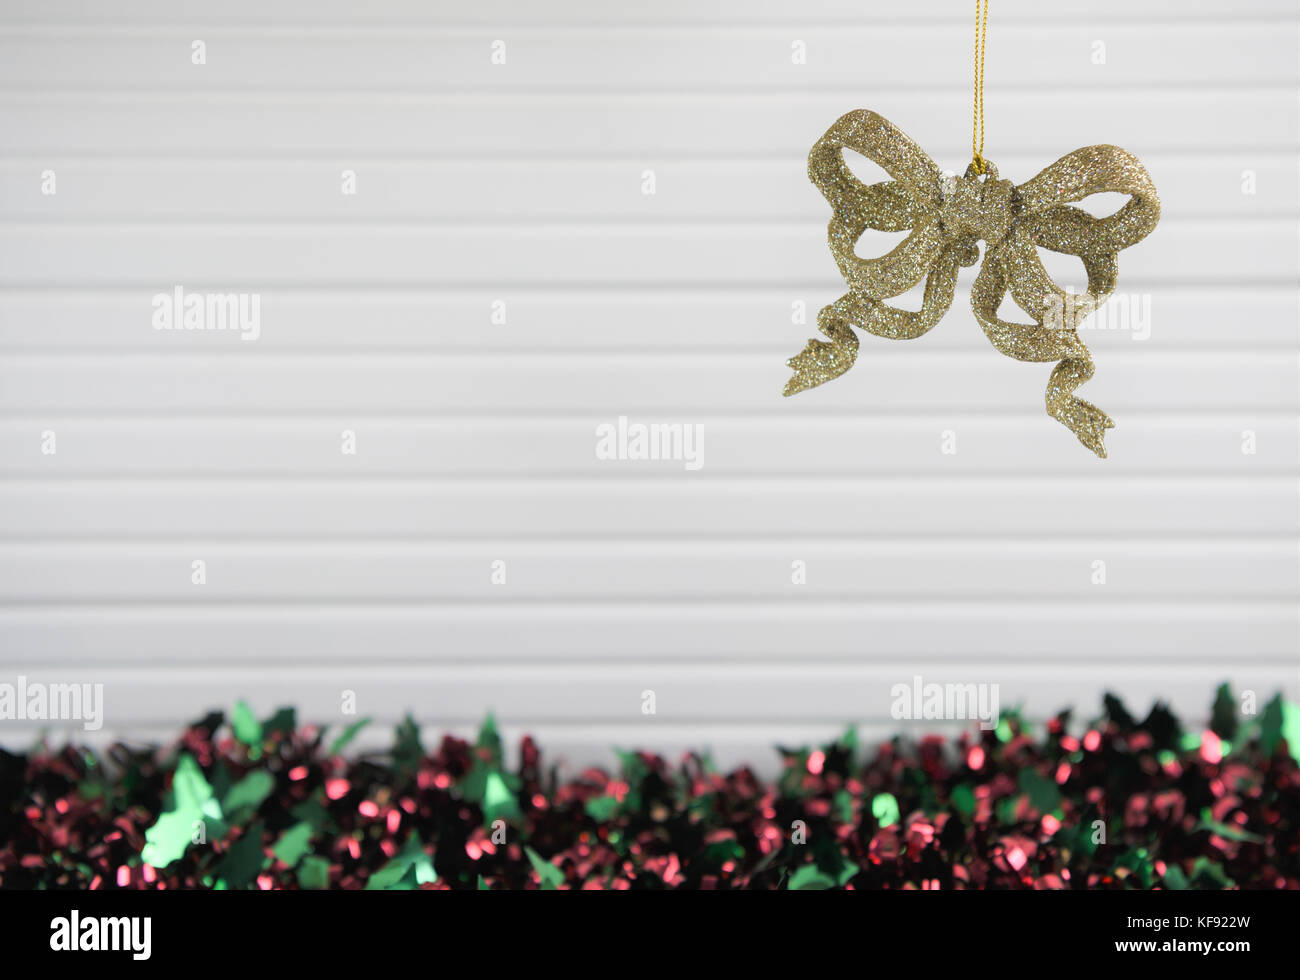 Christmas photography picture of xmas tree decoration hanging up of gold glitter sparkle bows with colored red green tinsel and white wood background Stock Photo